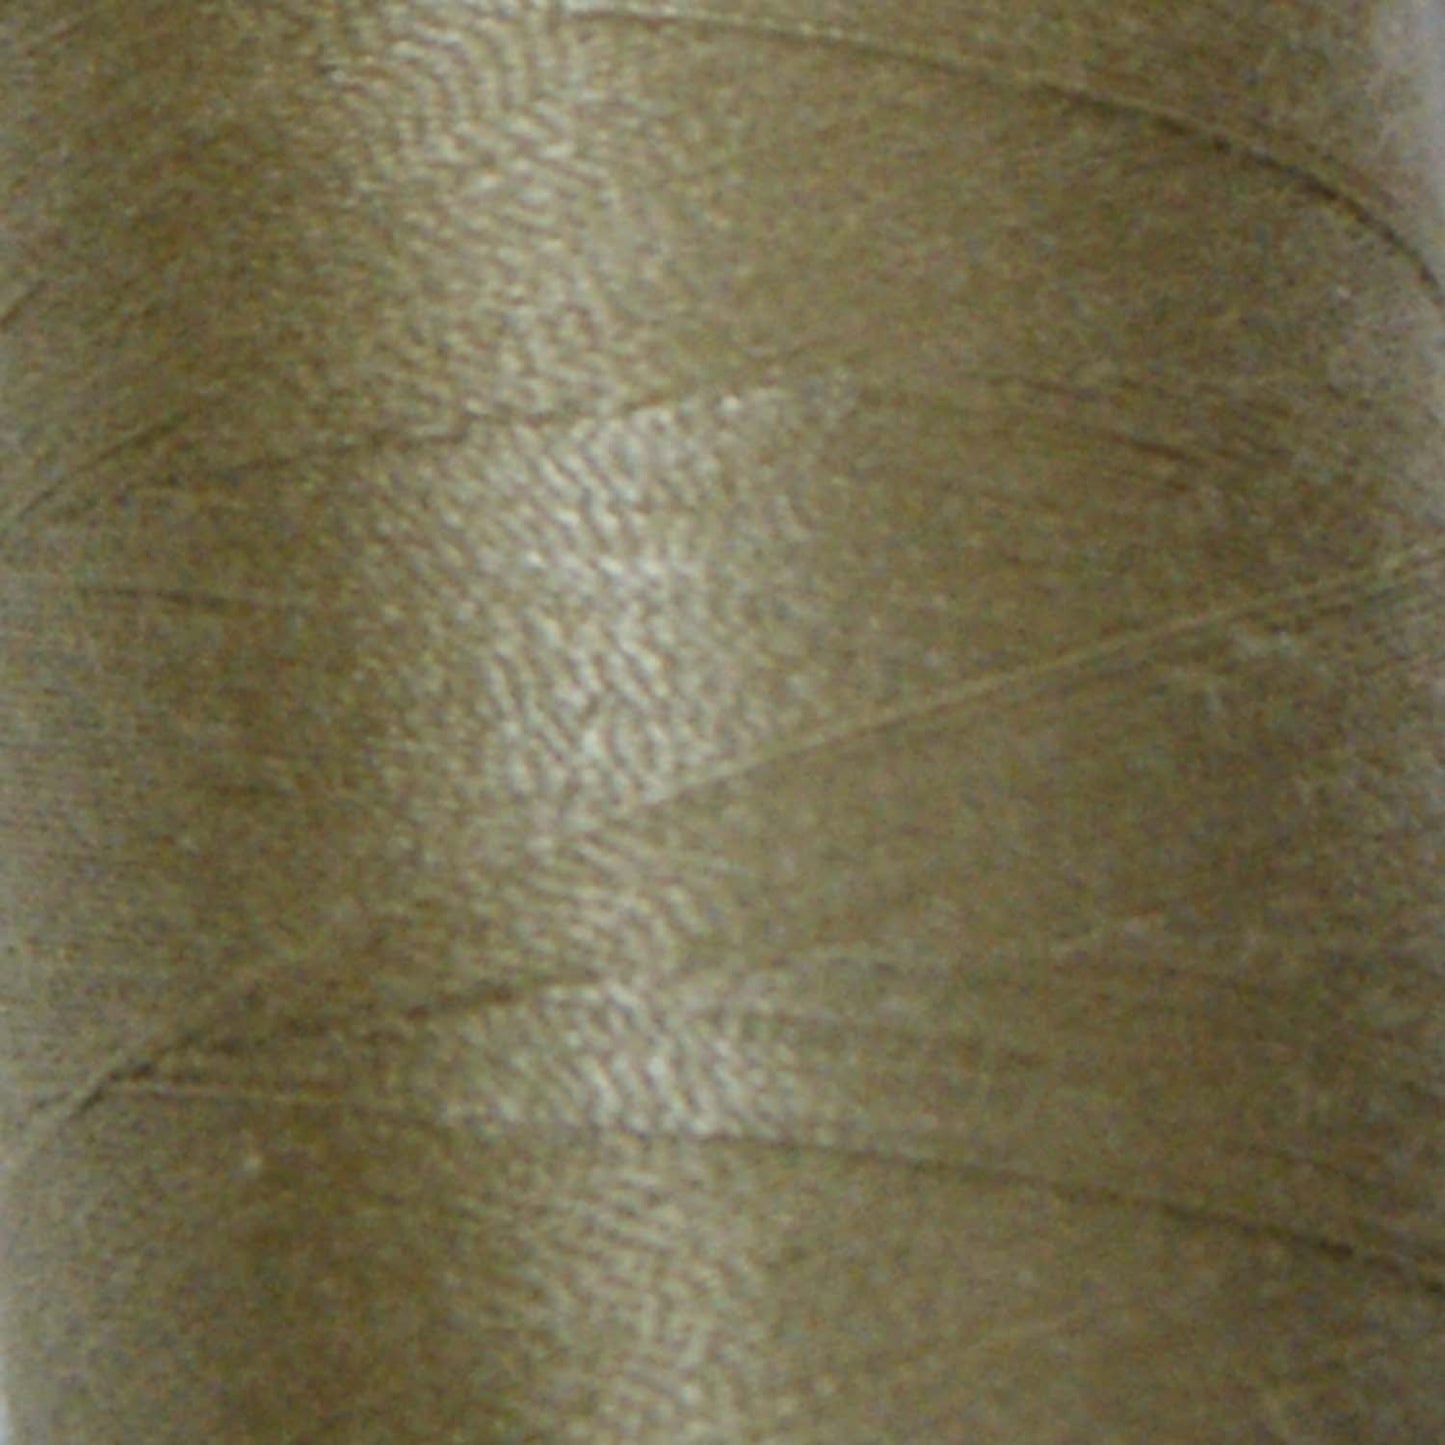 Moon 120's Spun Polyester 5000y cone M051 Beige